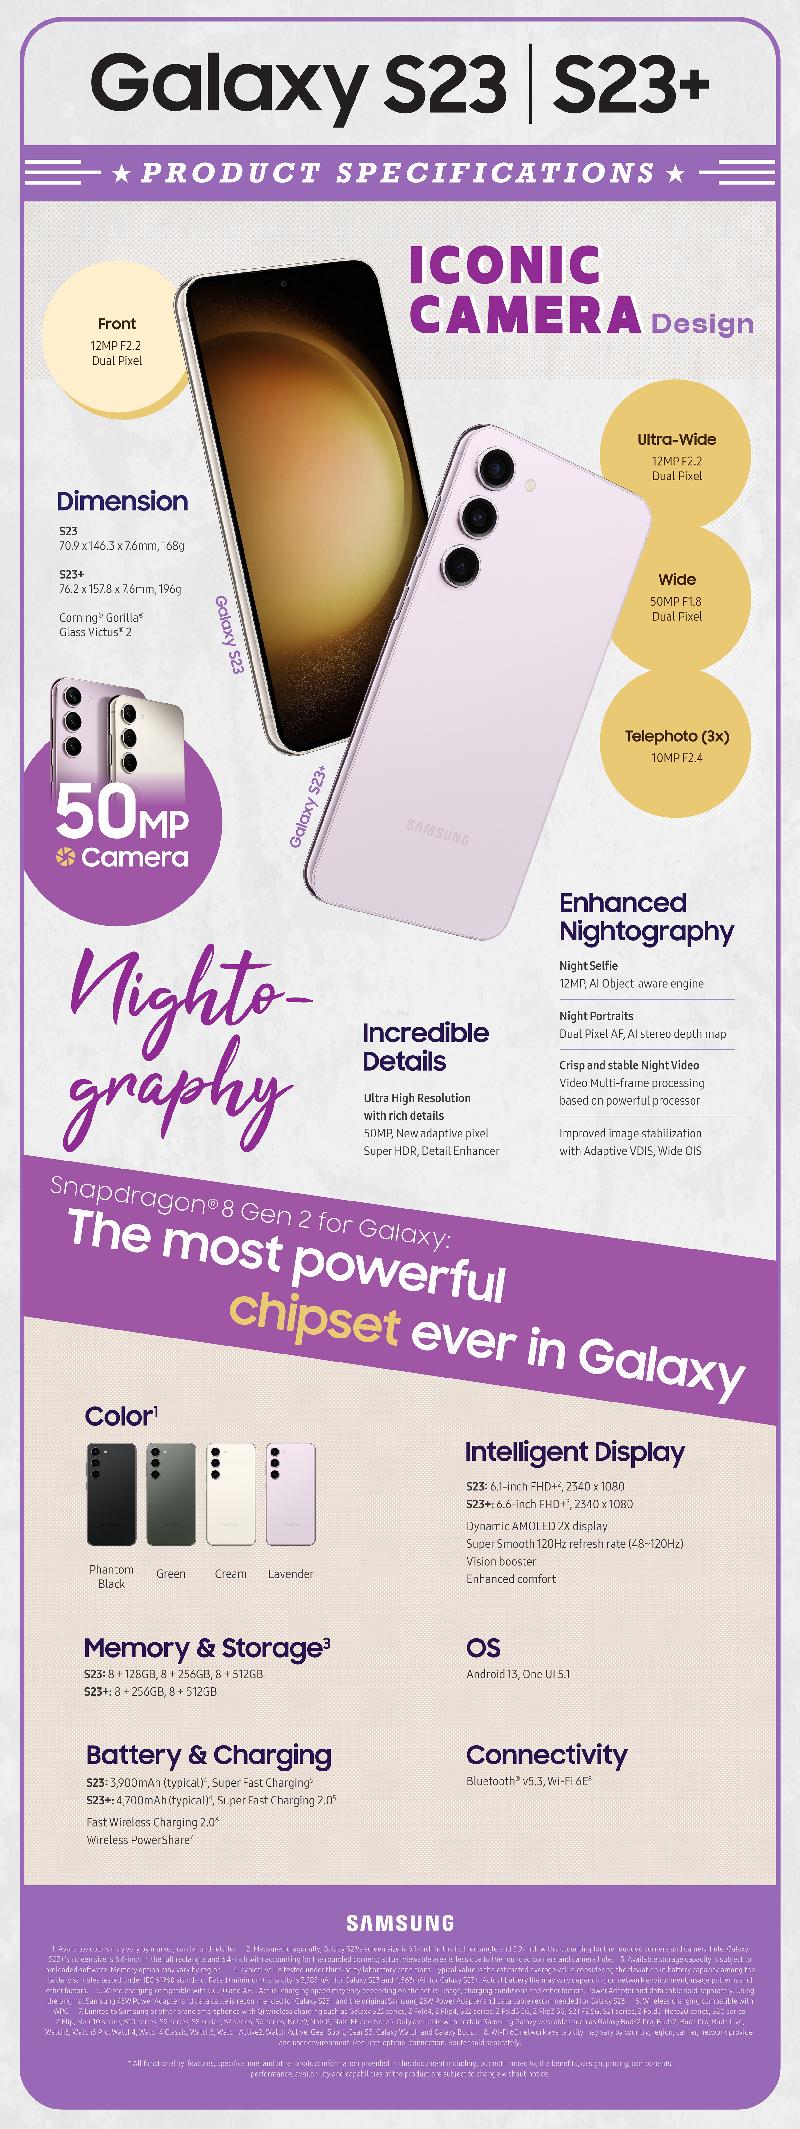 Galaxy_S23plus_S23_Infographic_Product Specifications.jpg